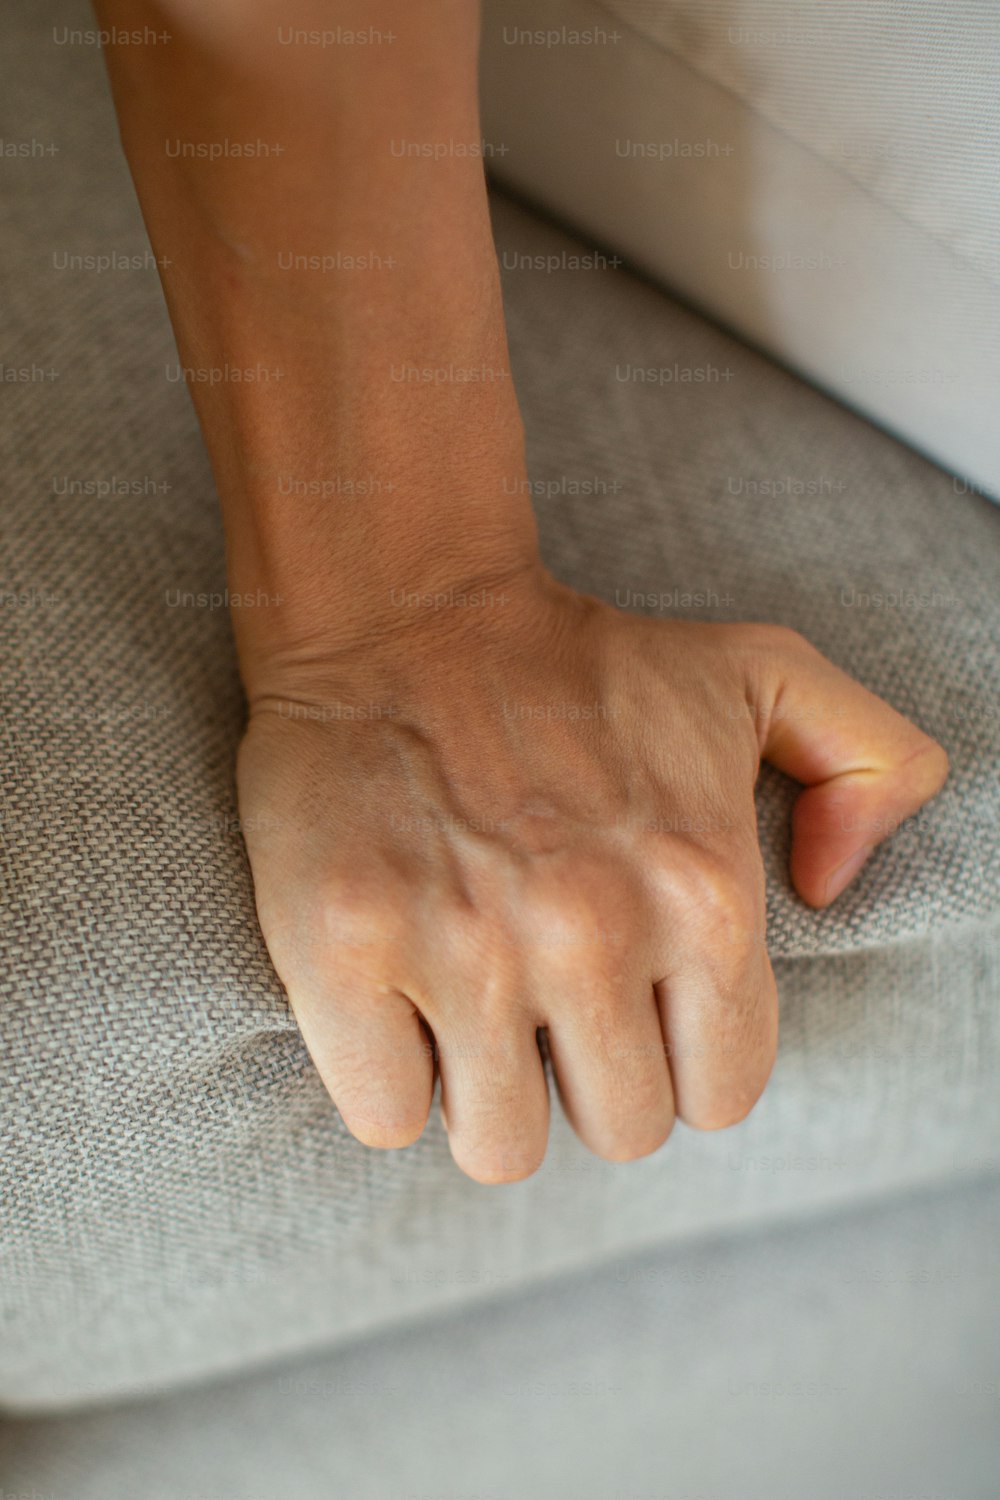 a close up of a person's hand on a couch